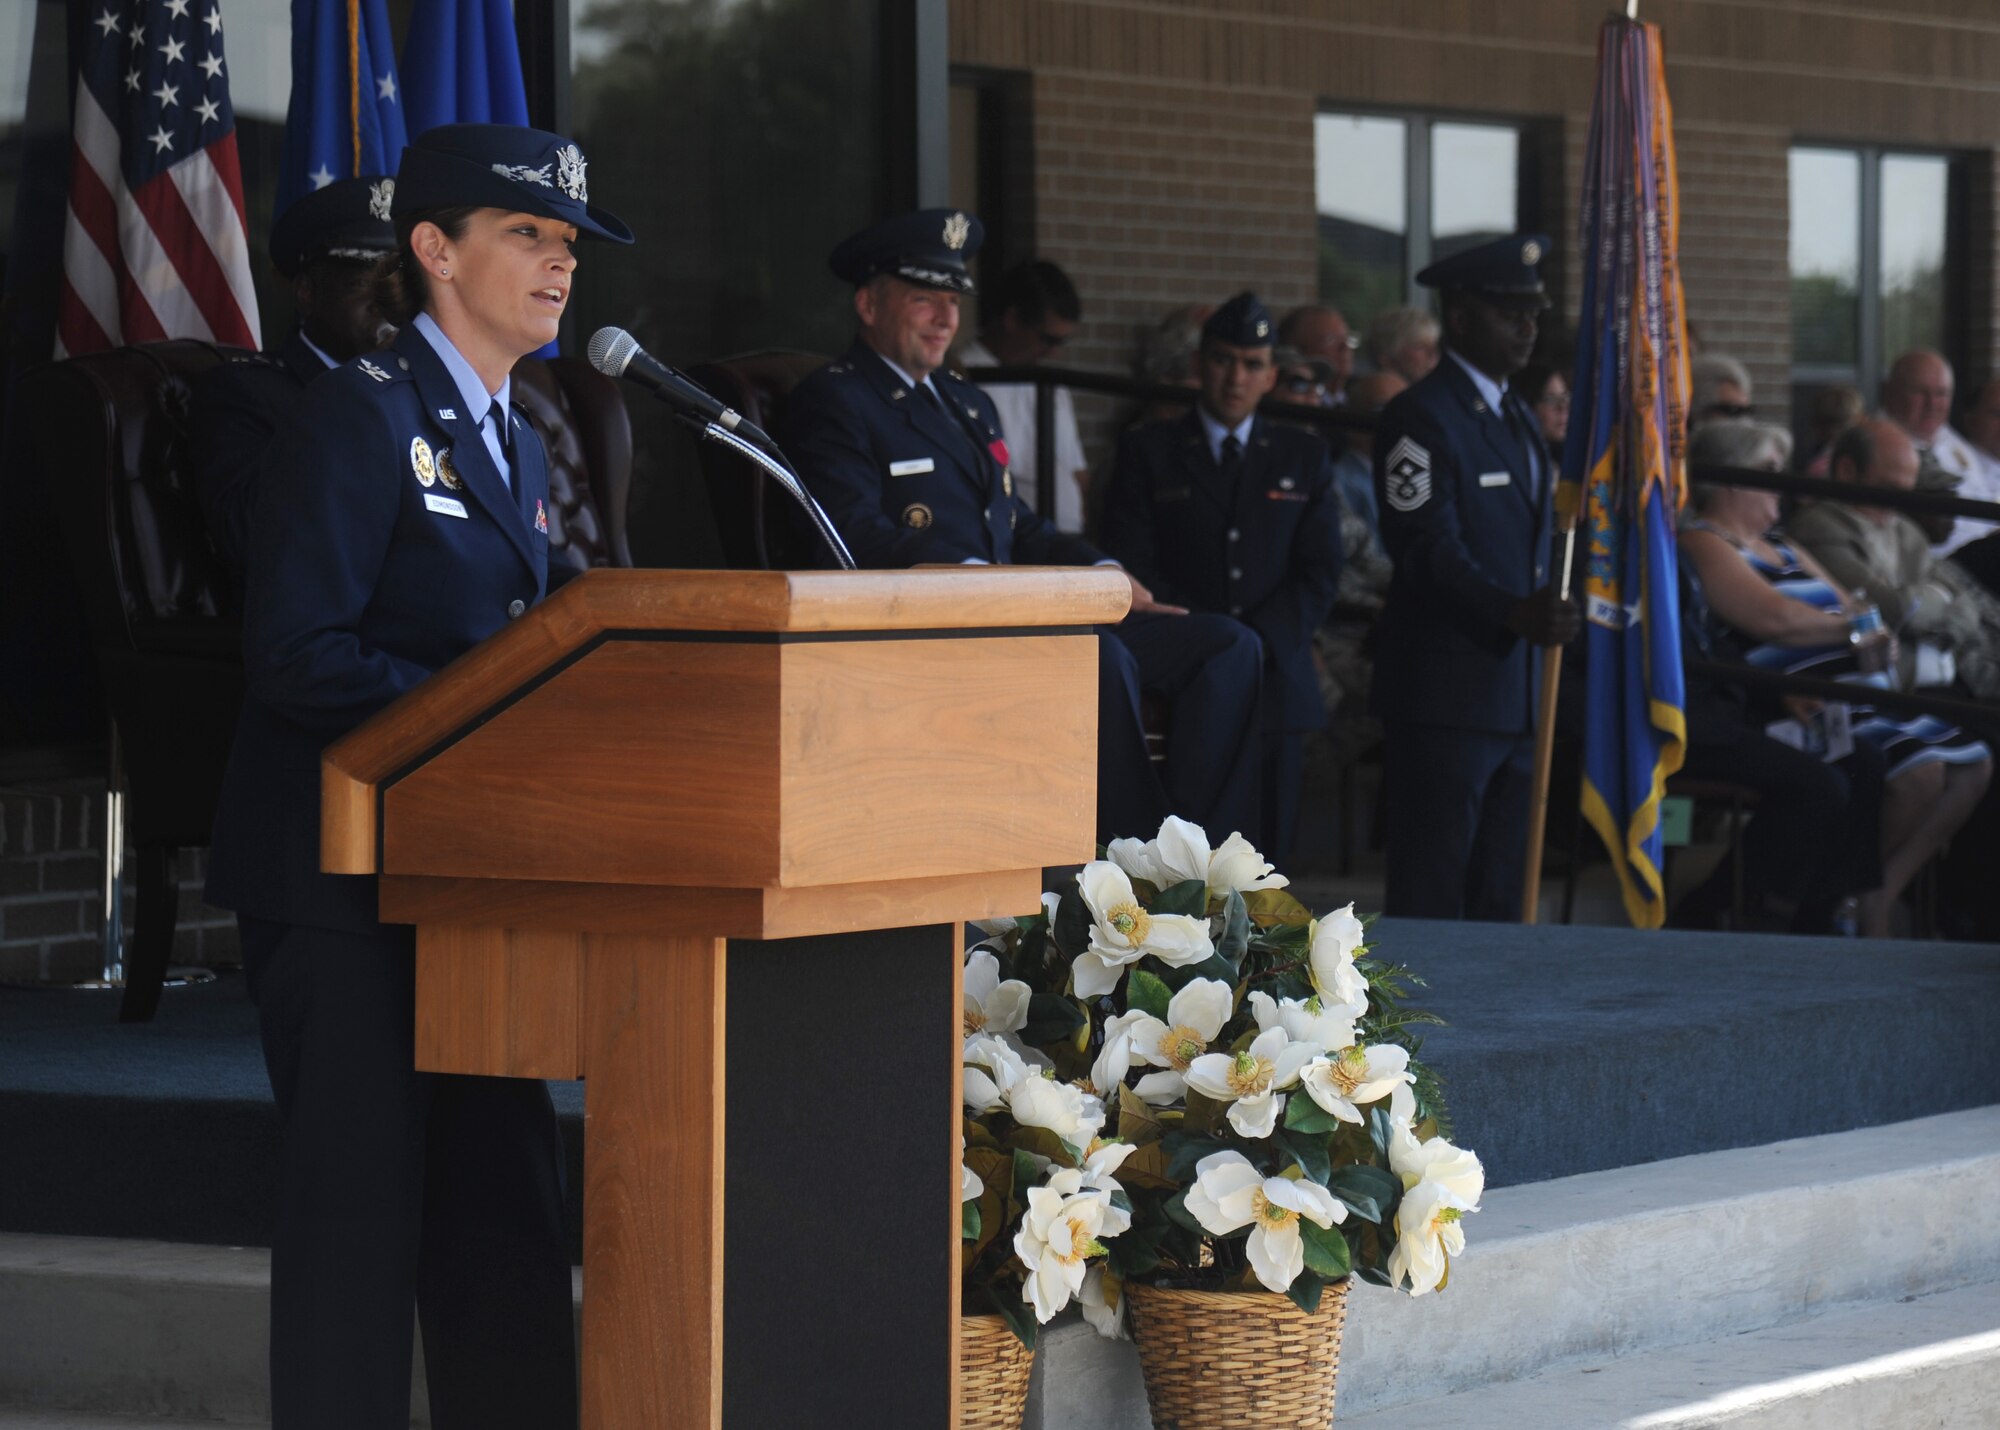 Col. Michele Edmondson, 81st Training Wing commander, gives her first speech as the 81st TRW commander during a change of command ceremony, June 26, 2015, Keesler Air Force Base, Miss. Edmondson took command of the 81st TRW from Brig. Gen. Patrick Higby. (U.S. Air Force photo by Senior Airman Holly Mansfield)